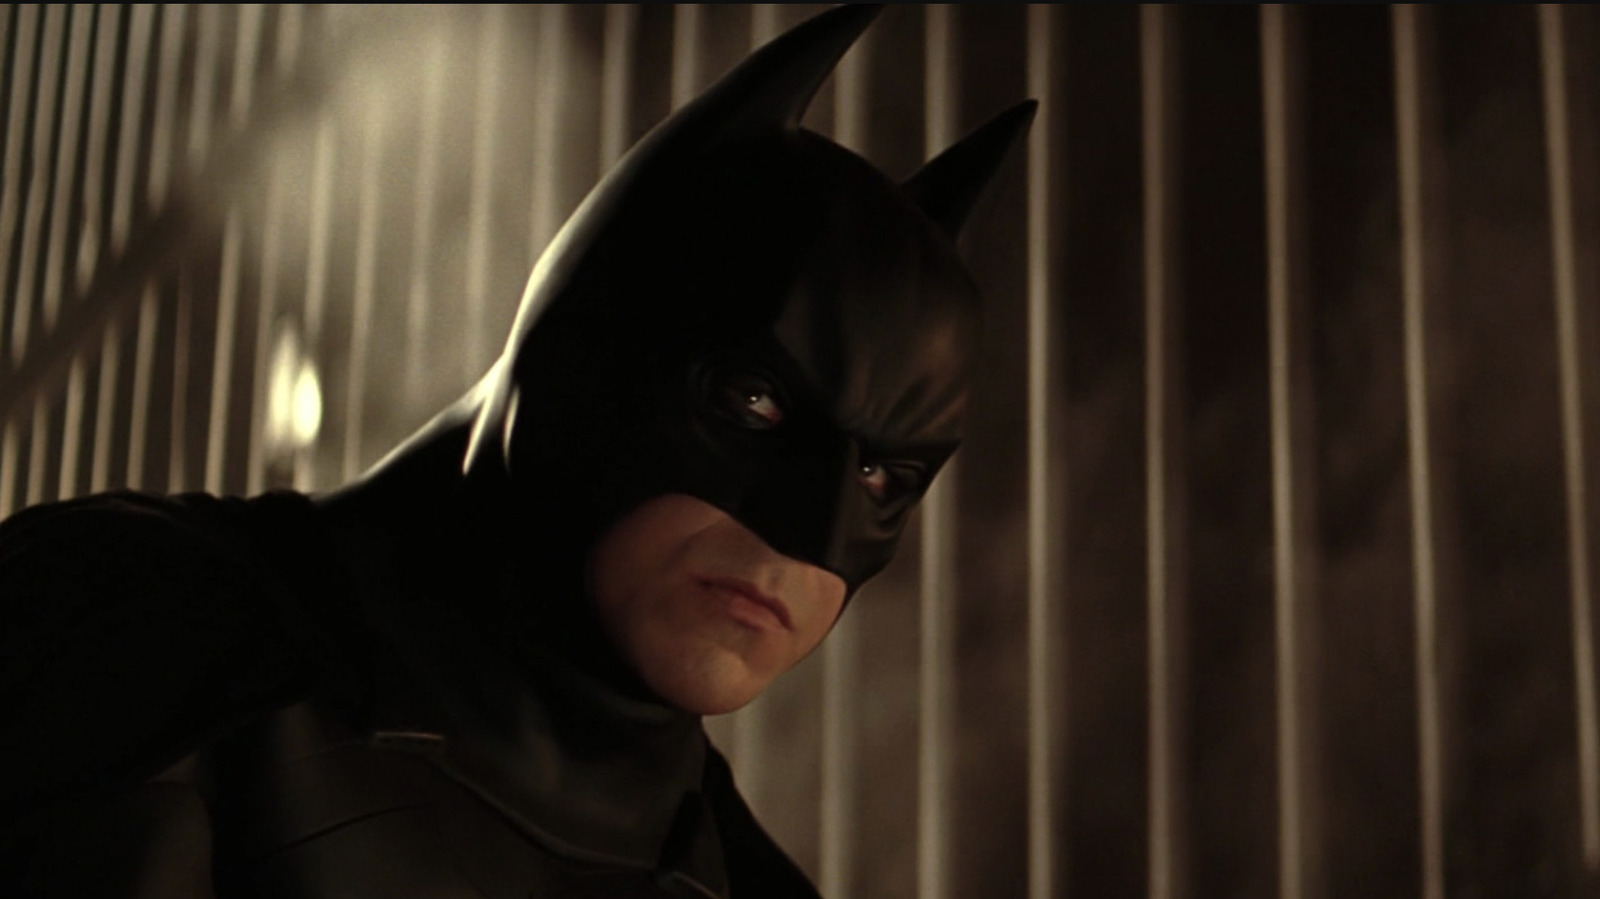 How Hans Zimmer Used His Score To Tell The Story Of Batman Begins